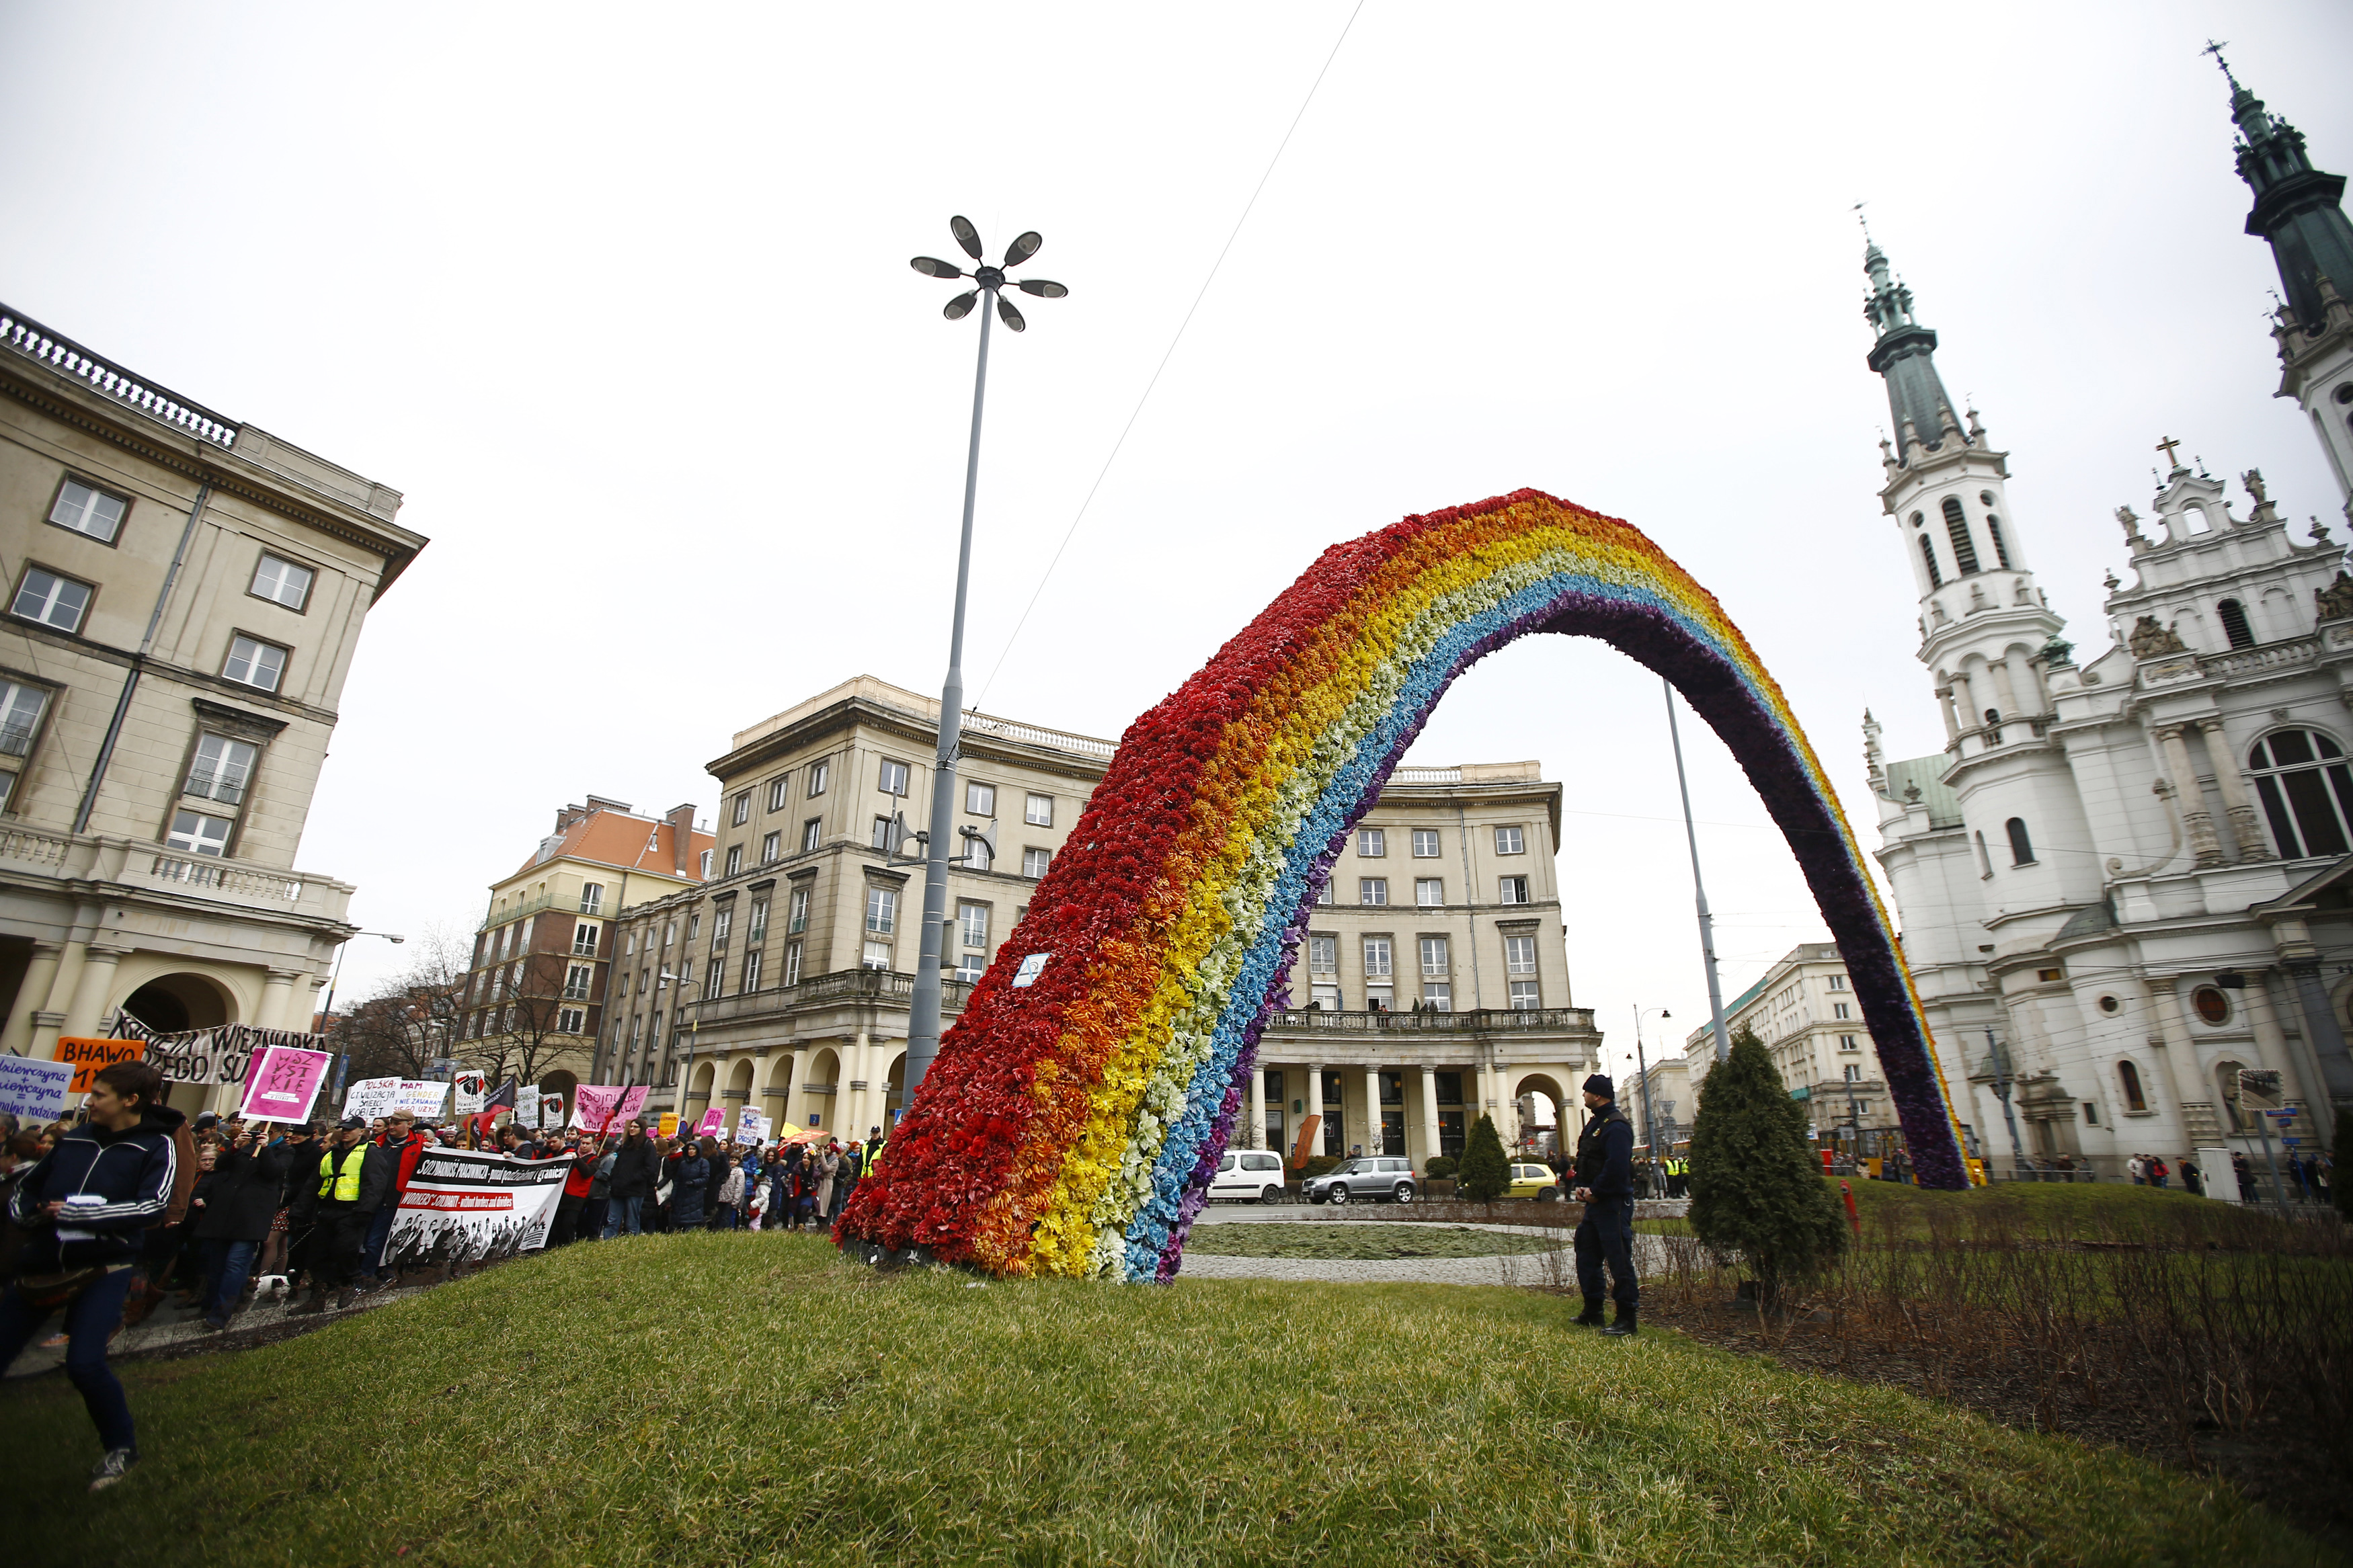 Participants march in front of artistic installation "Rainbow" during an International Woman's Day rally in Warsaw